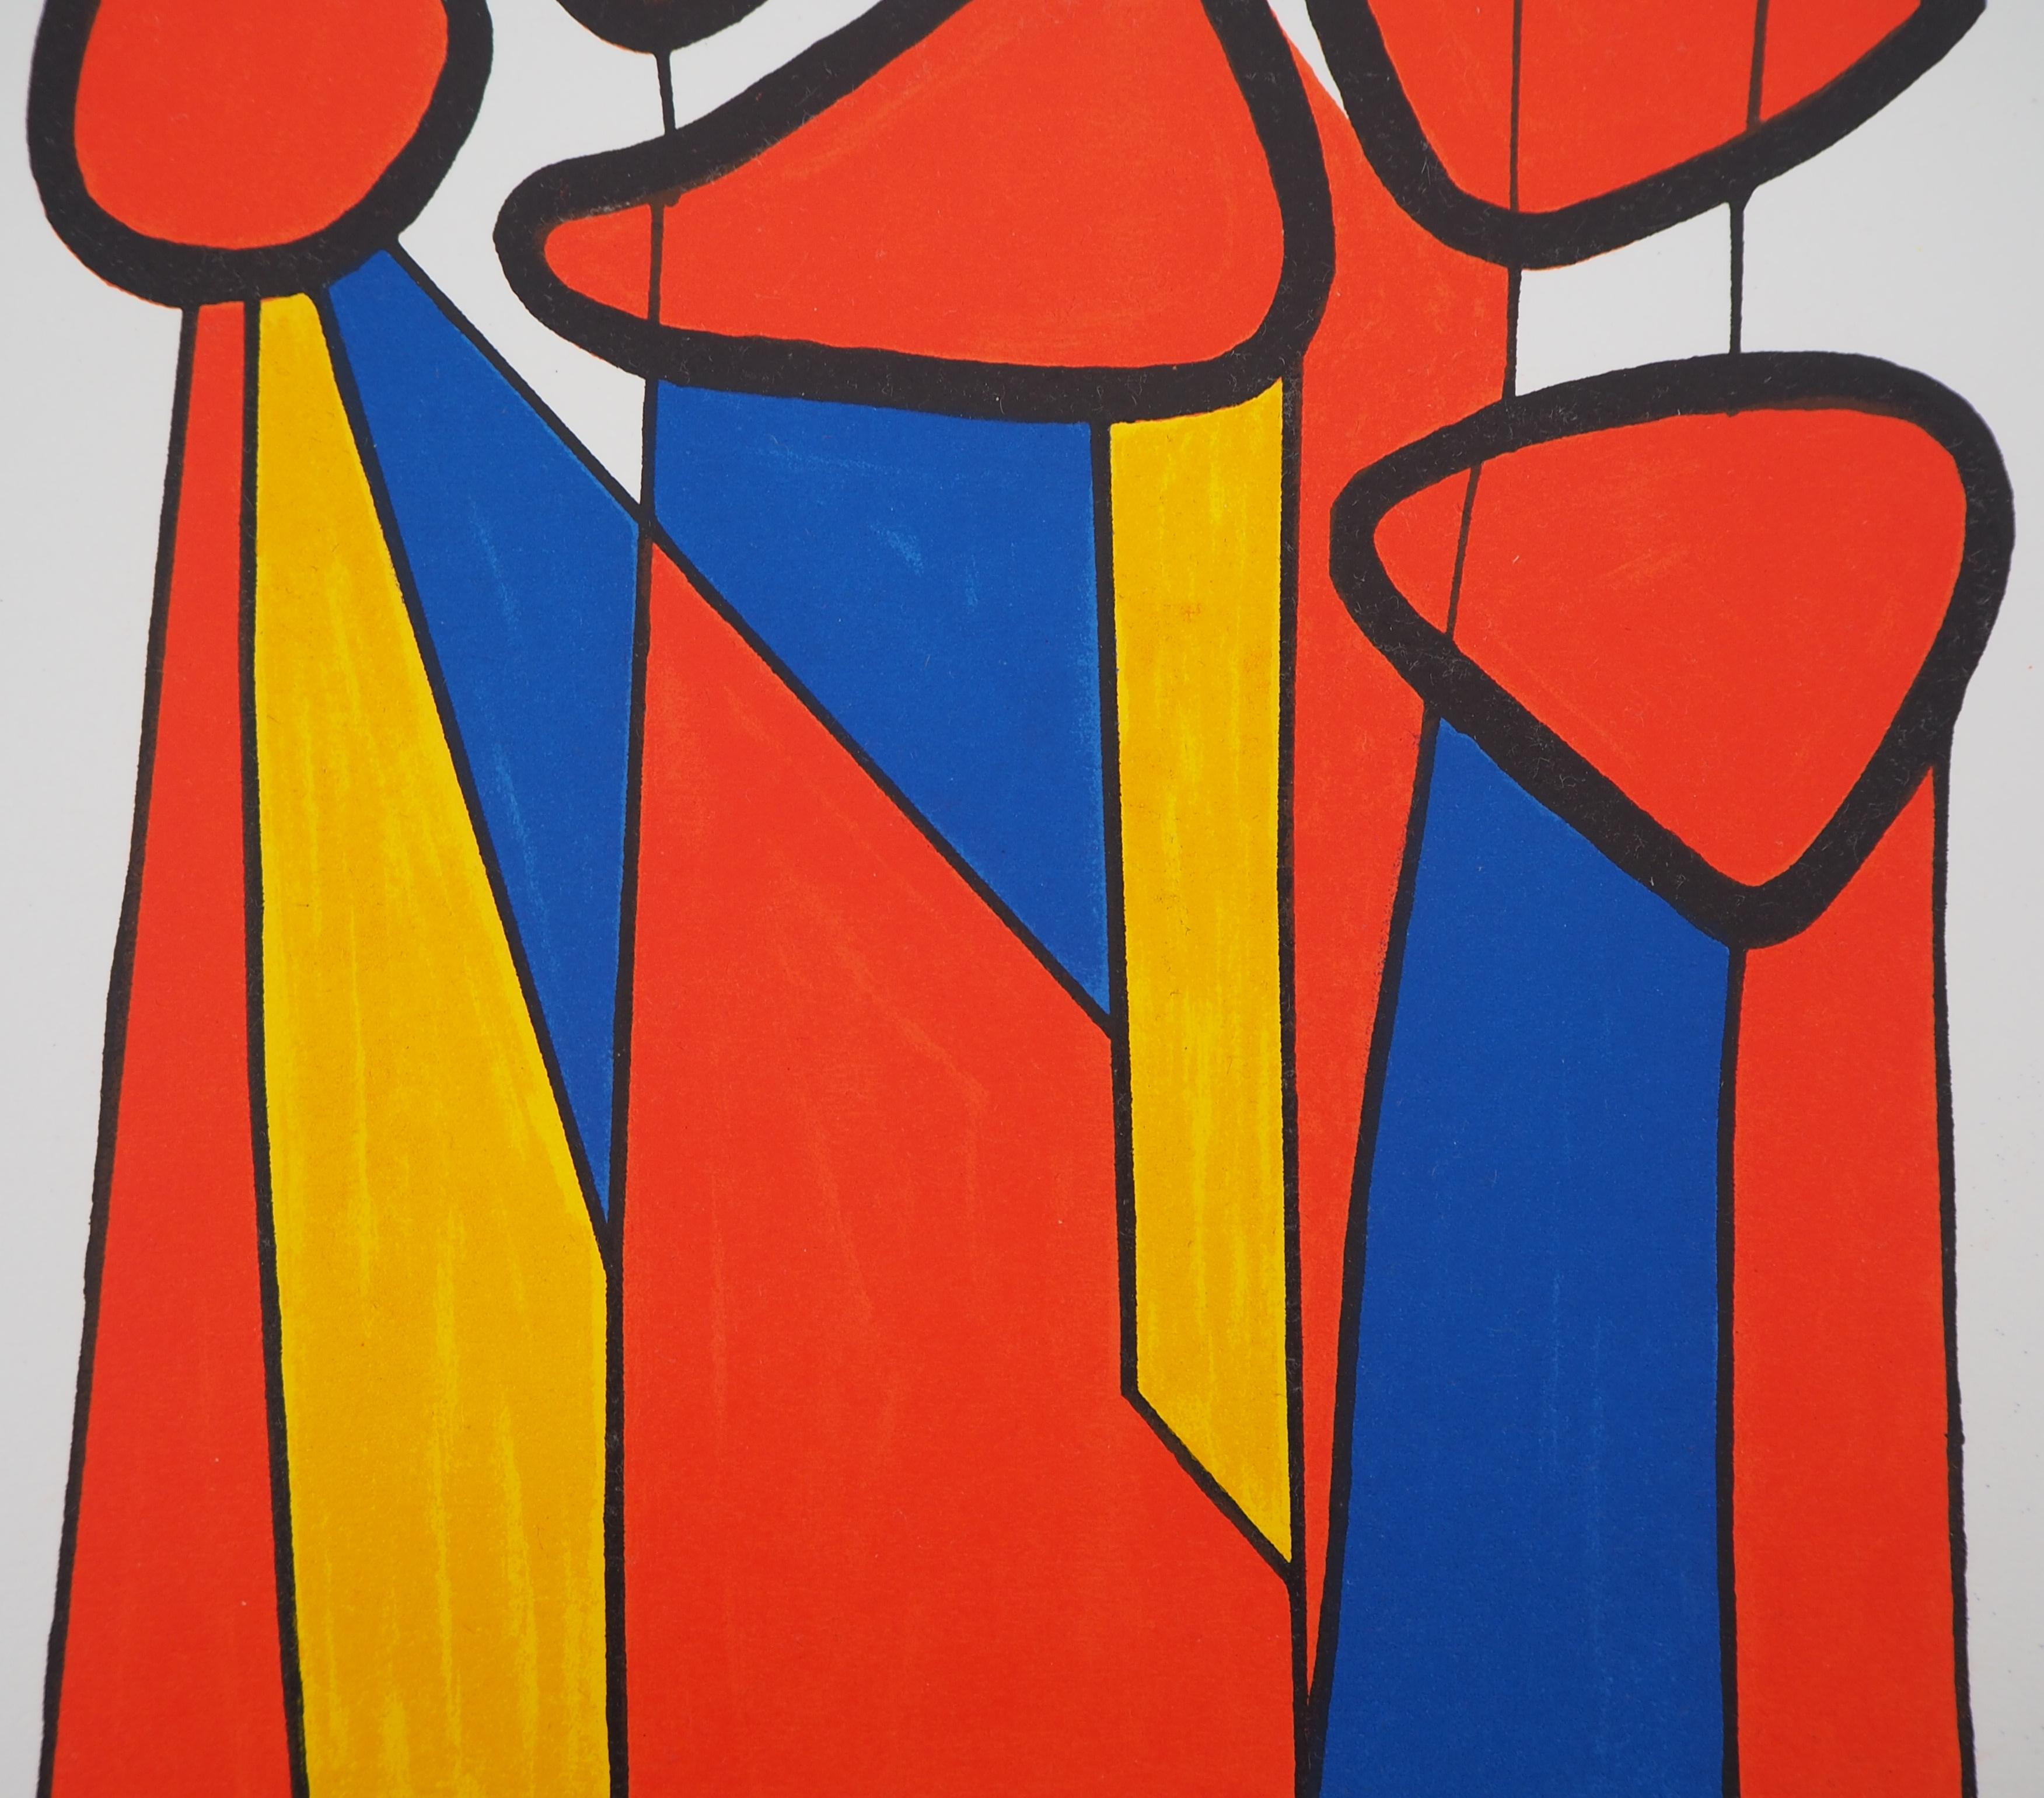 Alexander Calder
Composition in Red, Yellow and Blue, 1972

Original Lithograph (4 color stones)
Printed in Mourlot workshop
On vellum 31 x 24 cm (c. 12,2 x 9,5 in)
Edited by San Lazzaro in 1972 ; unsigned and unumbered as issued

Excellent